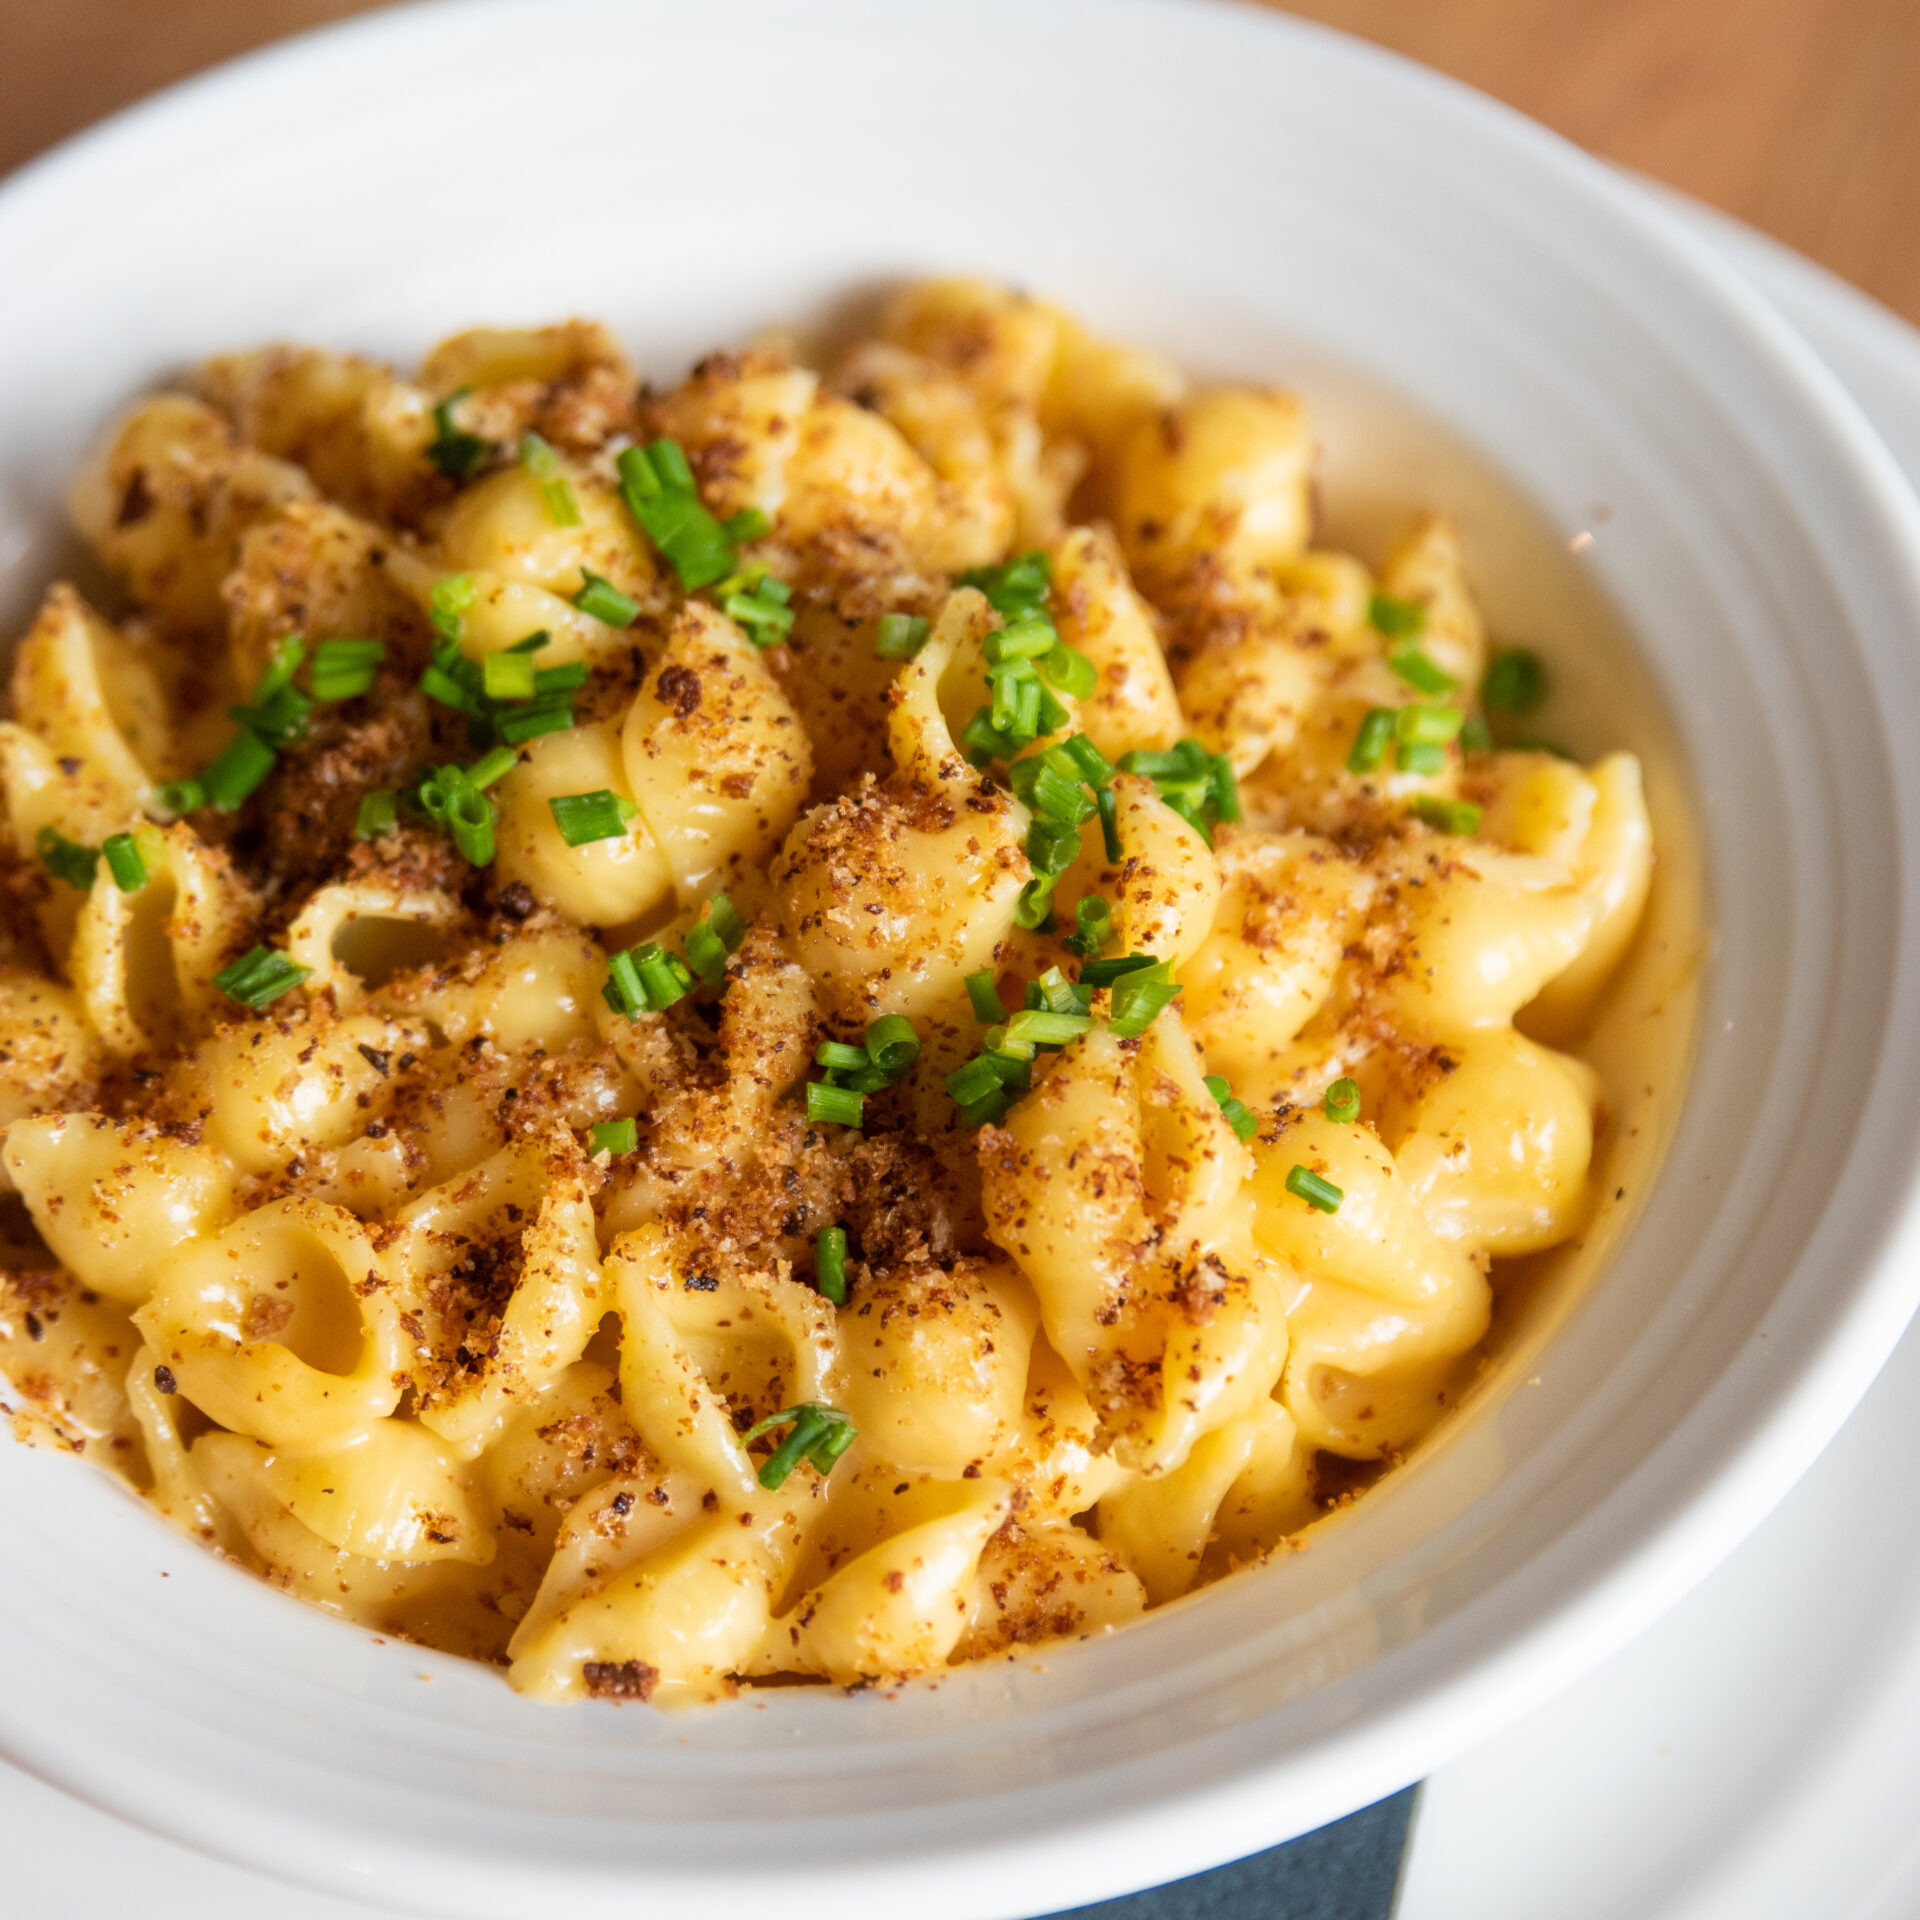 mac n cheese recipe showing mac n cheese in a bowl with spices and herbs on top